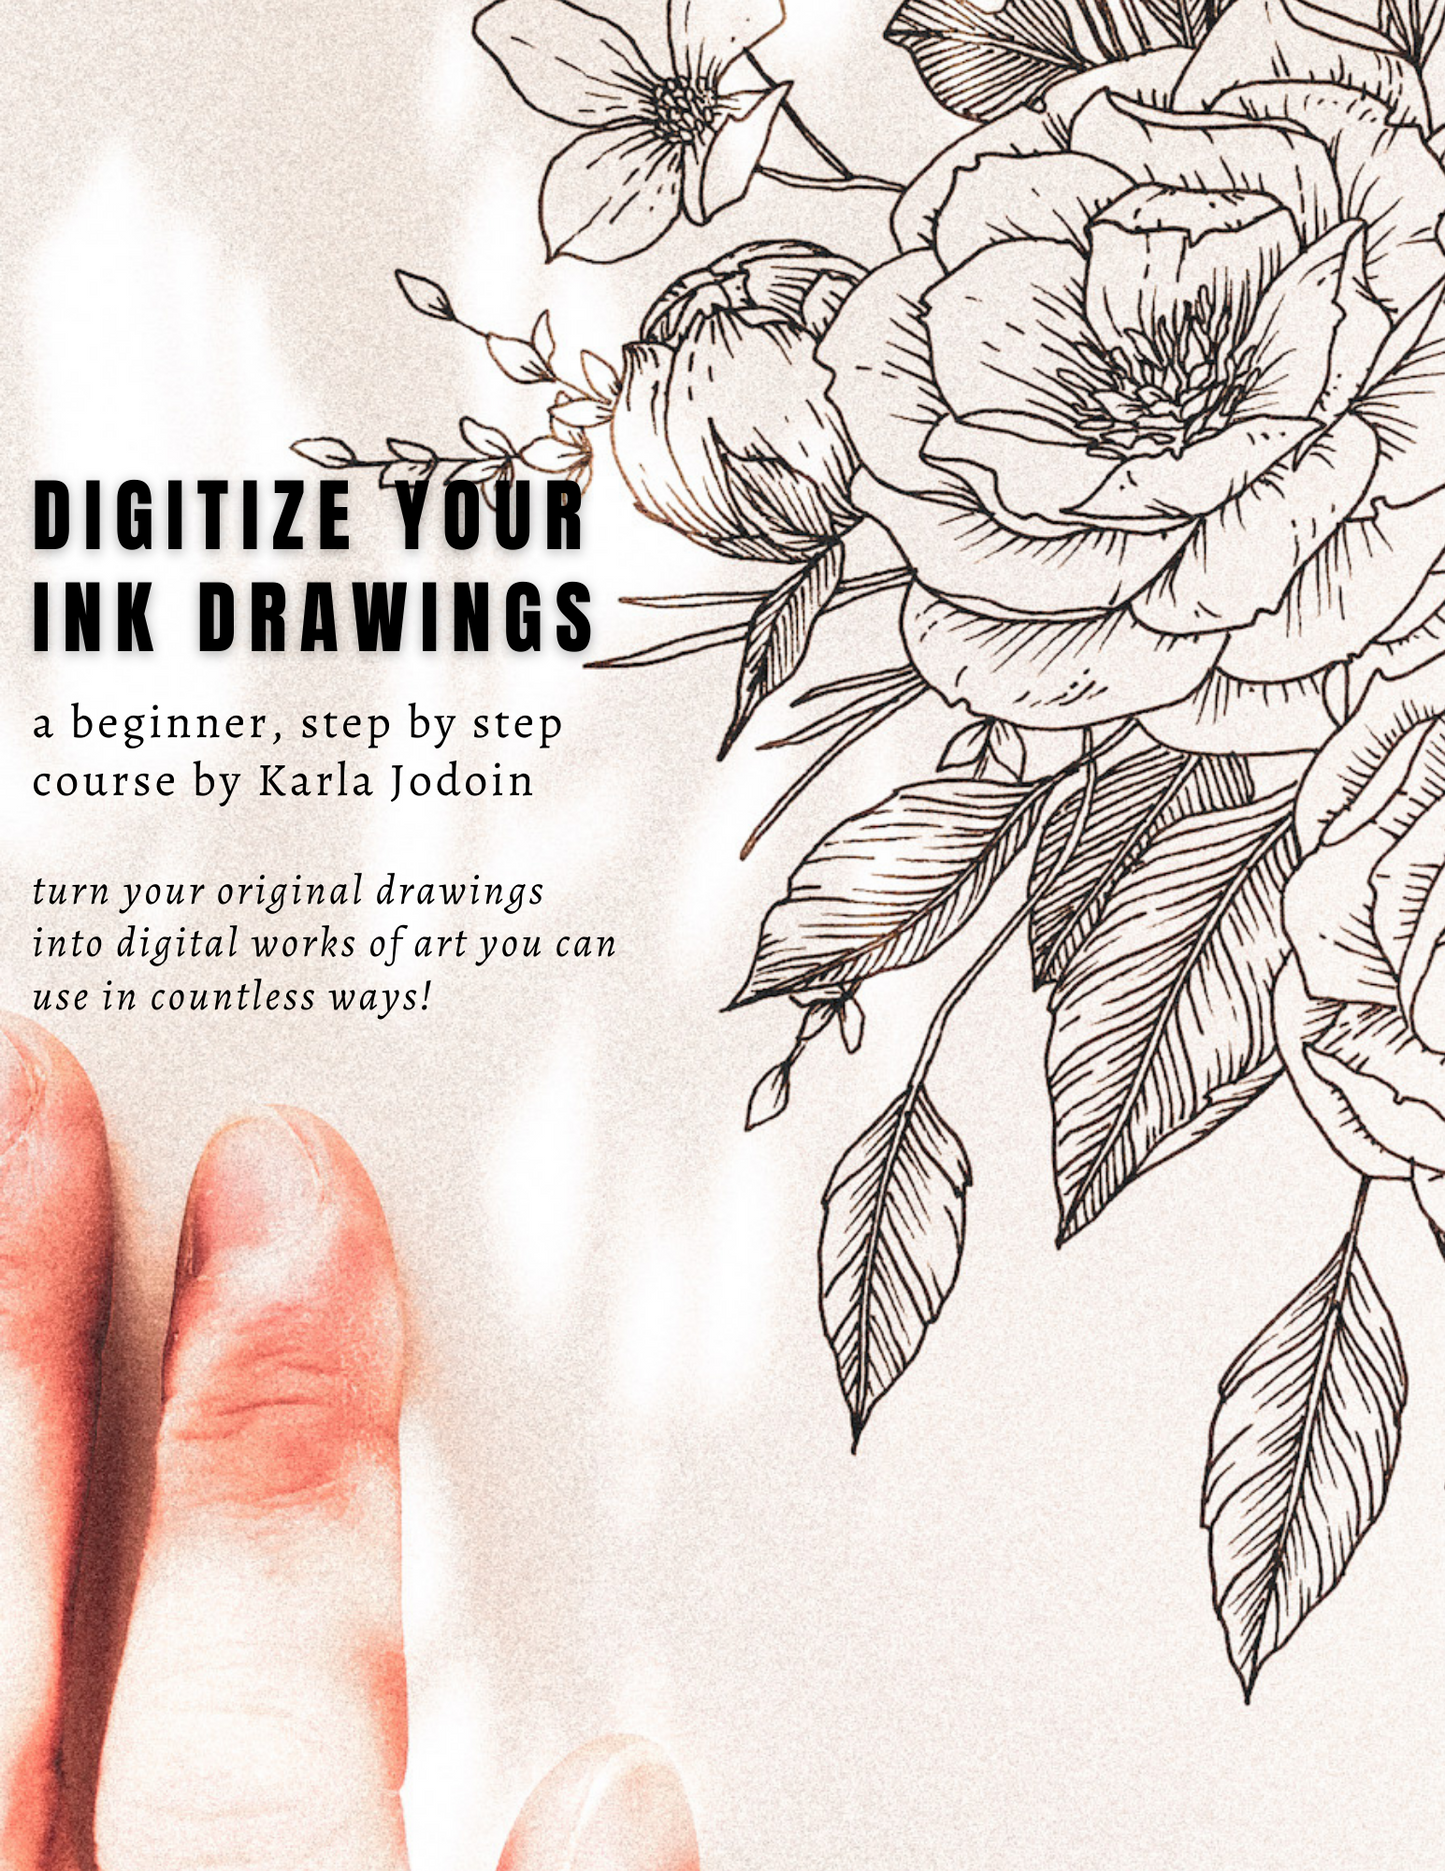 Digitize Your Drawings: Learn how to turn your original drawings into digital works of art